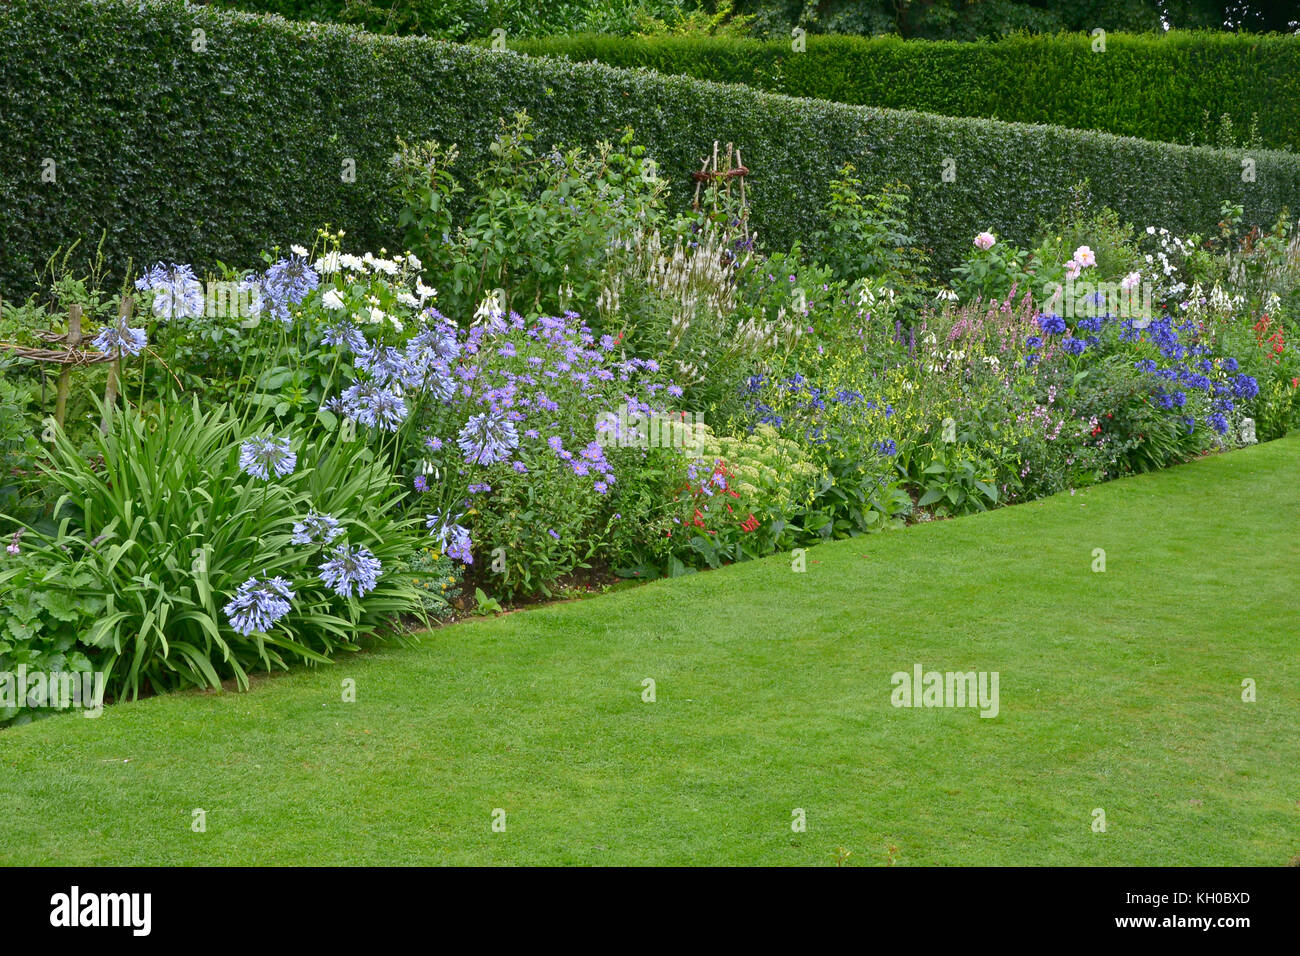 A garden flower border with mixed planting including Agapanthus, Asters, Veronicastrum and Dahlias Stock Photo